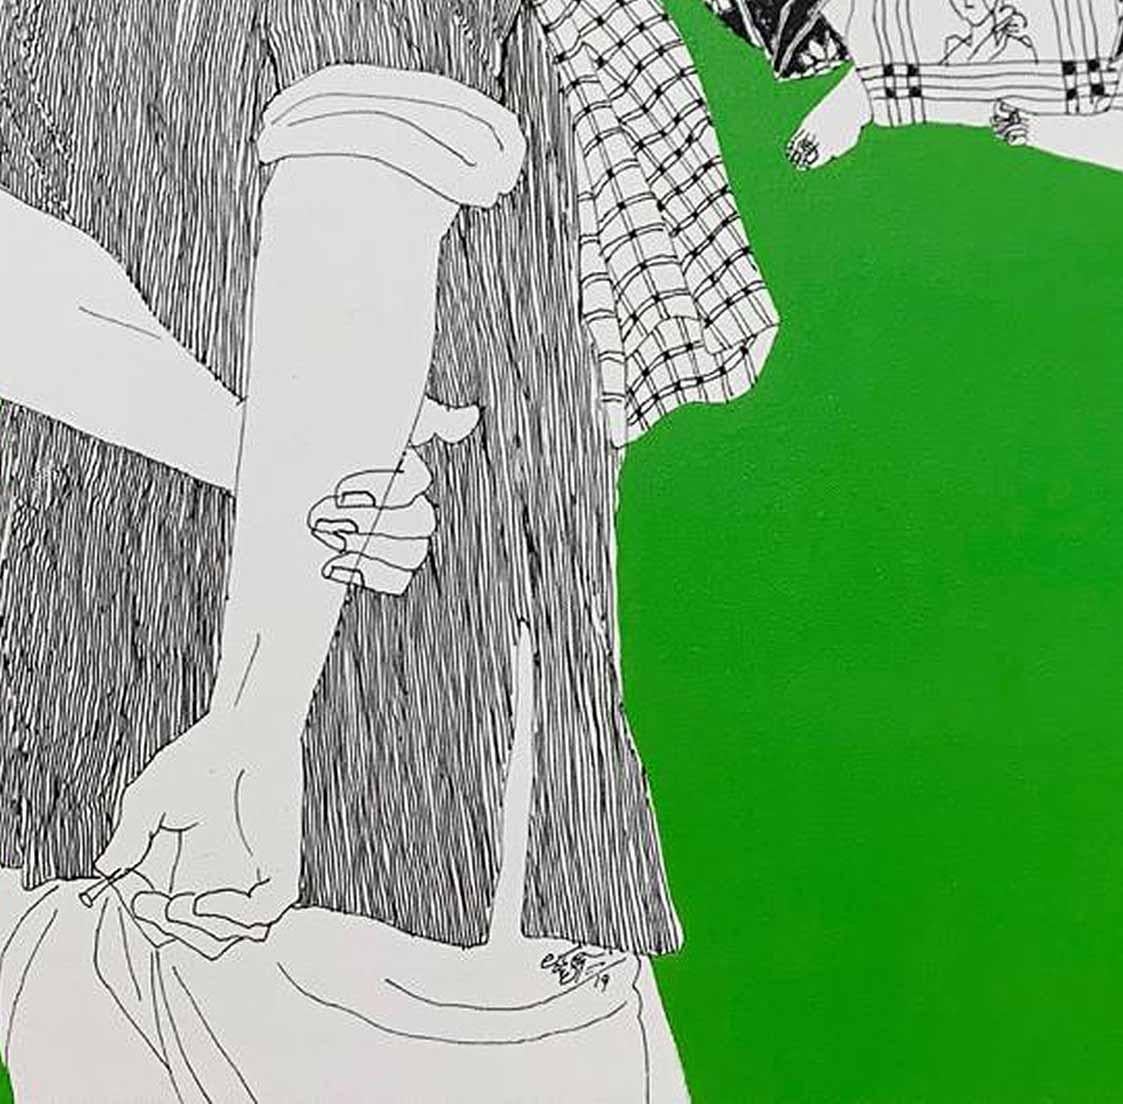 Telengana Man & Women, Acrylic on Canvas, Green by South Indian Artist